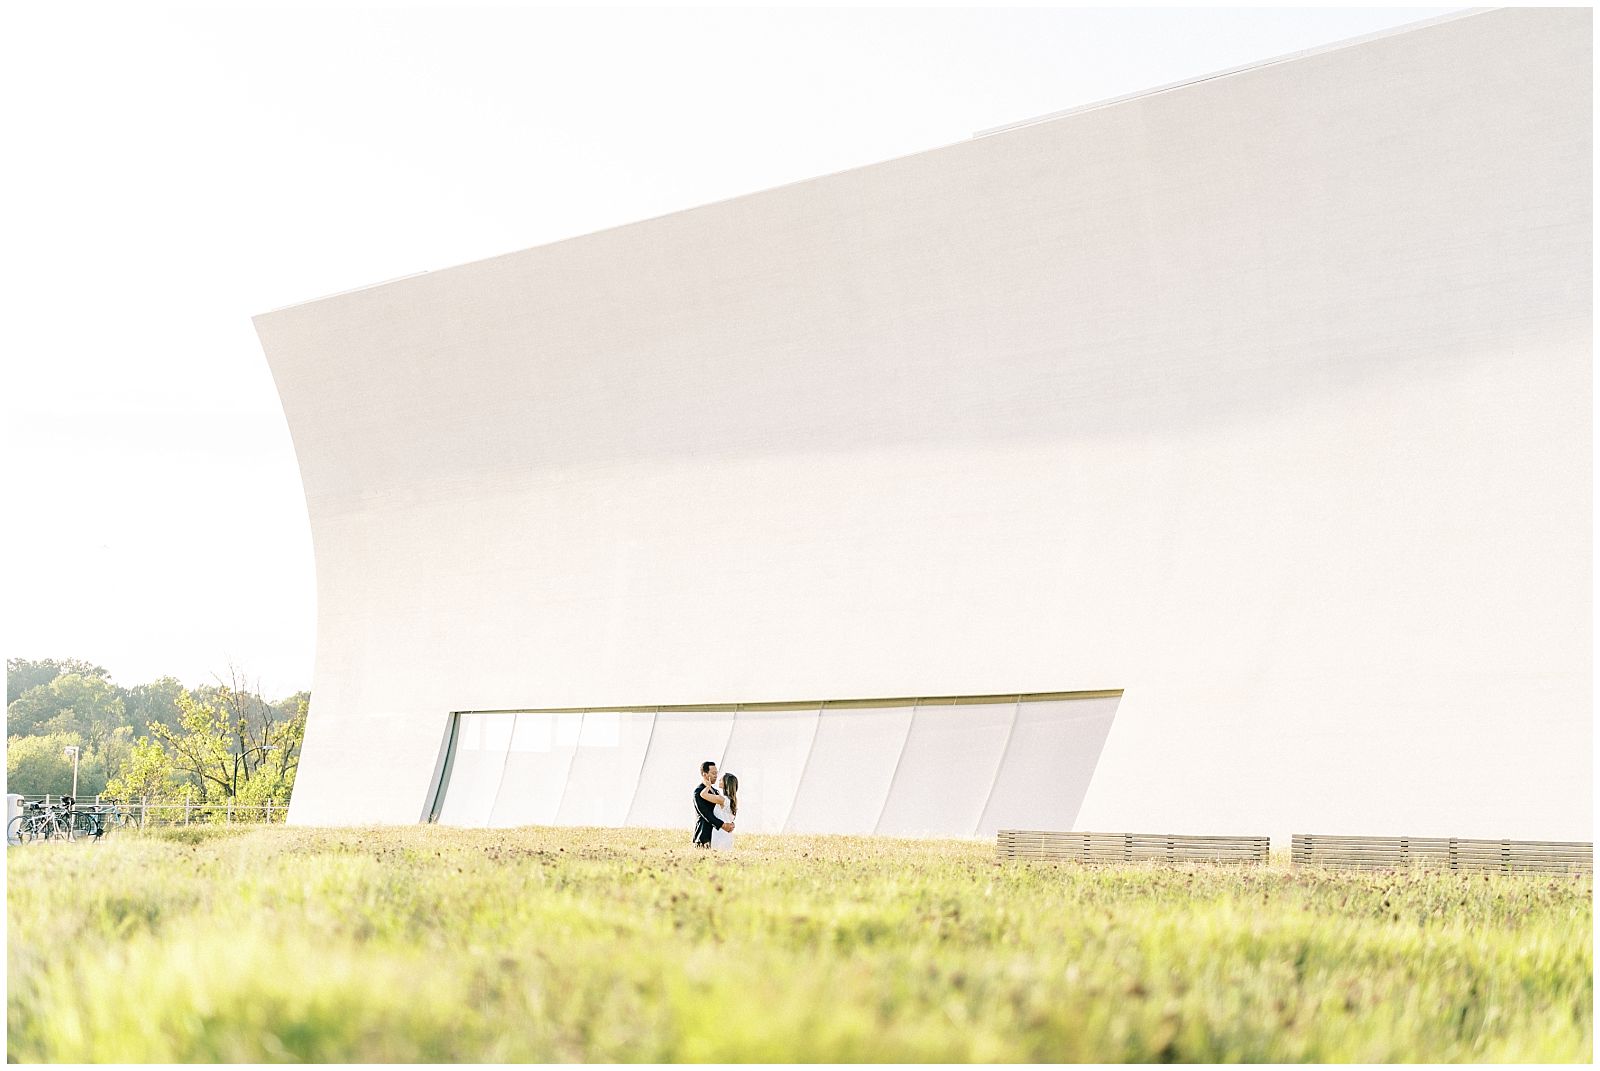 The REACH at the Kennedy Center engagement photography